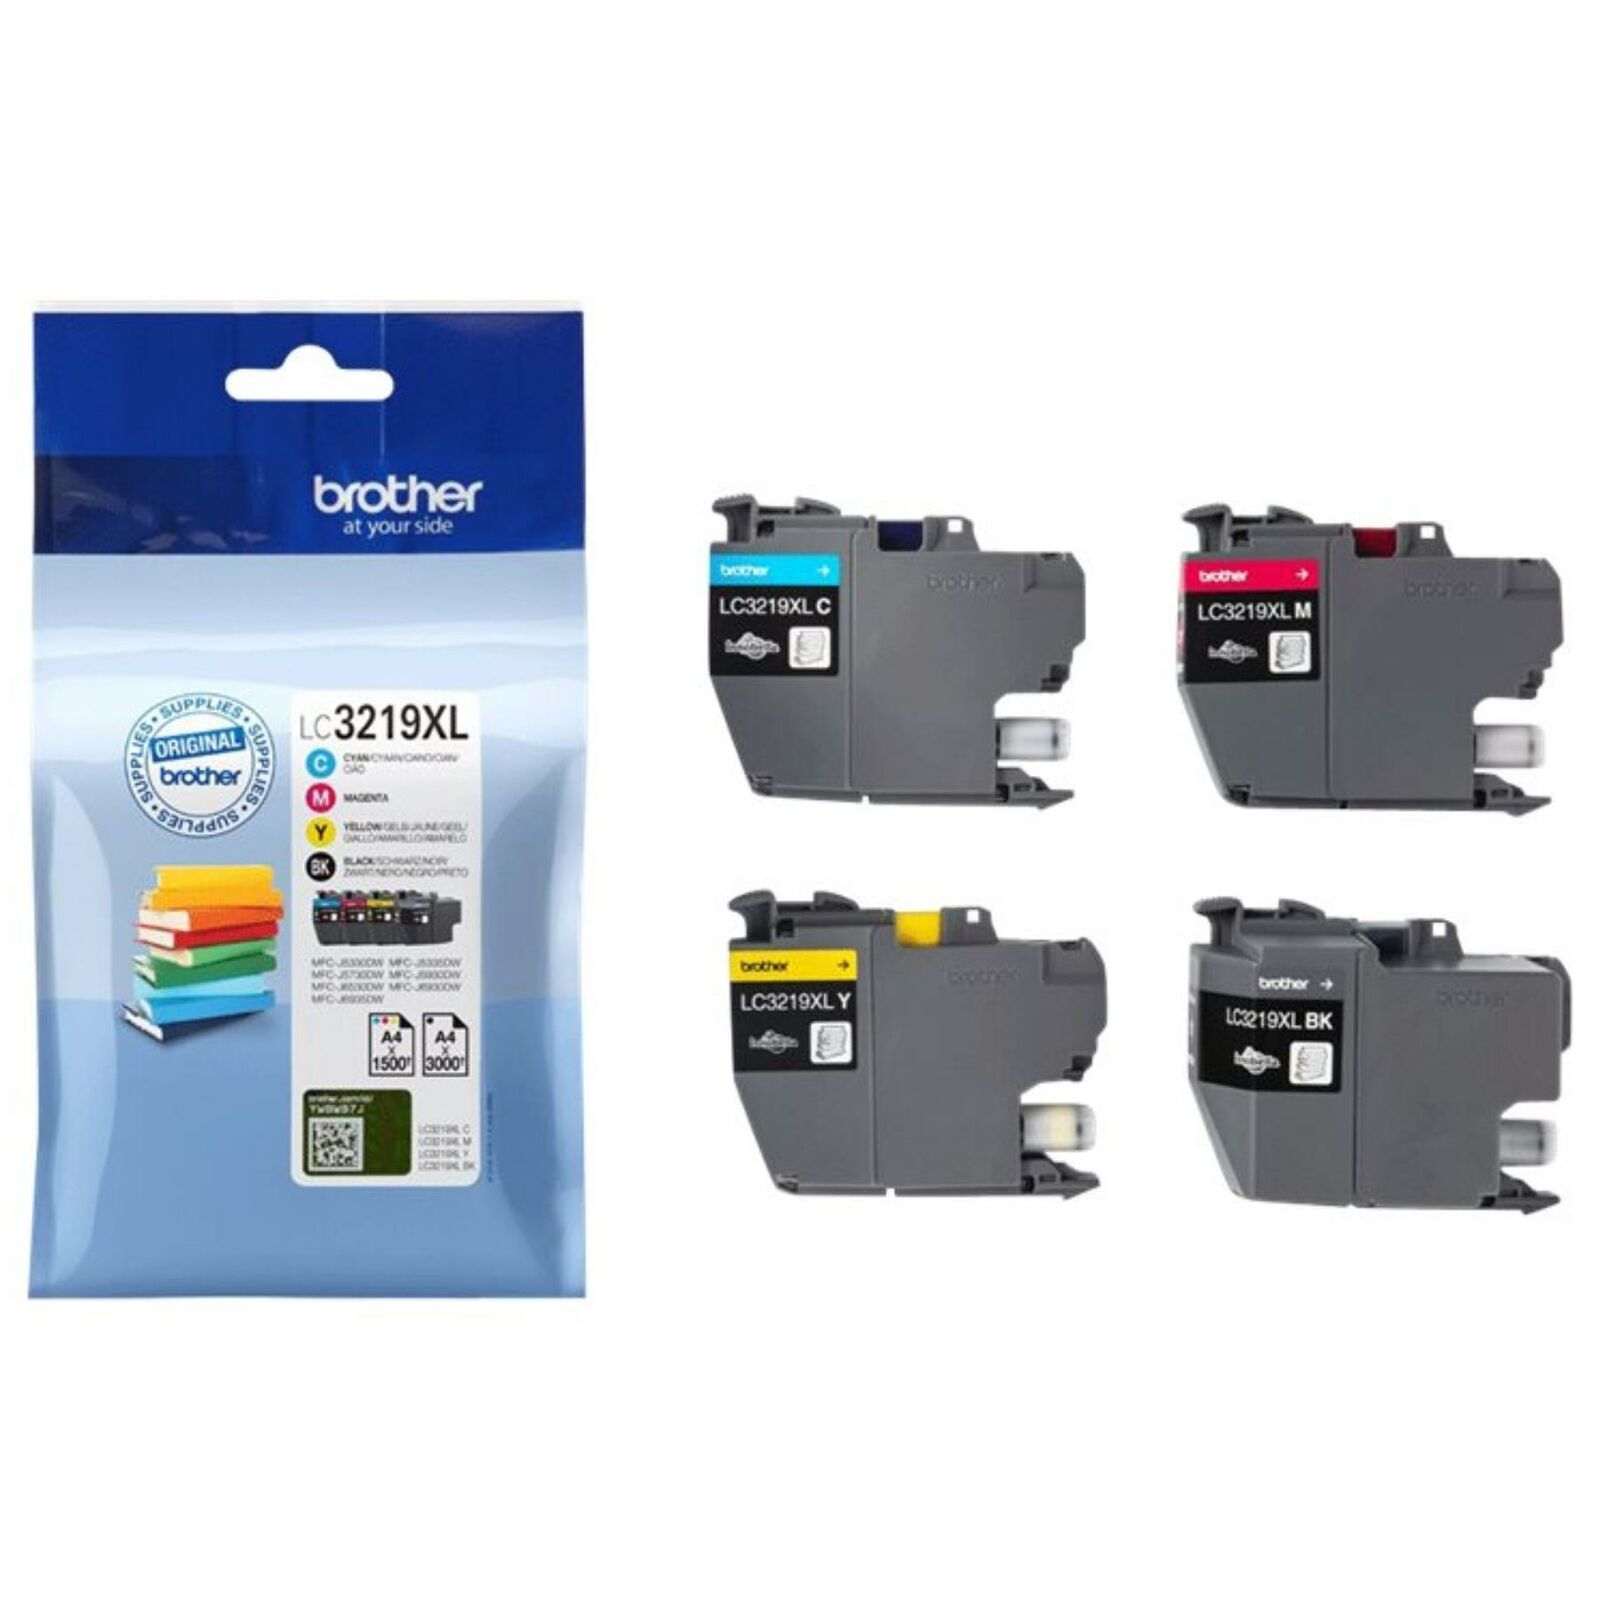 Brother LC3219XL BK/M/C/Y Ink Cartridge Value Pack?For Brother Printer.